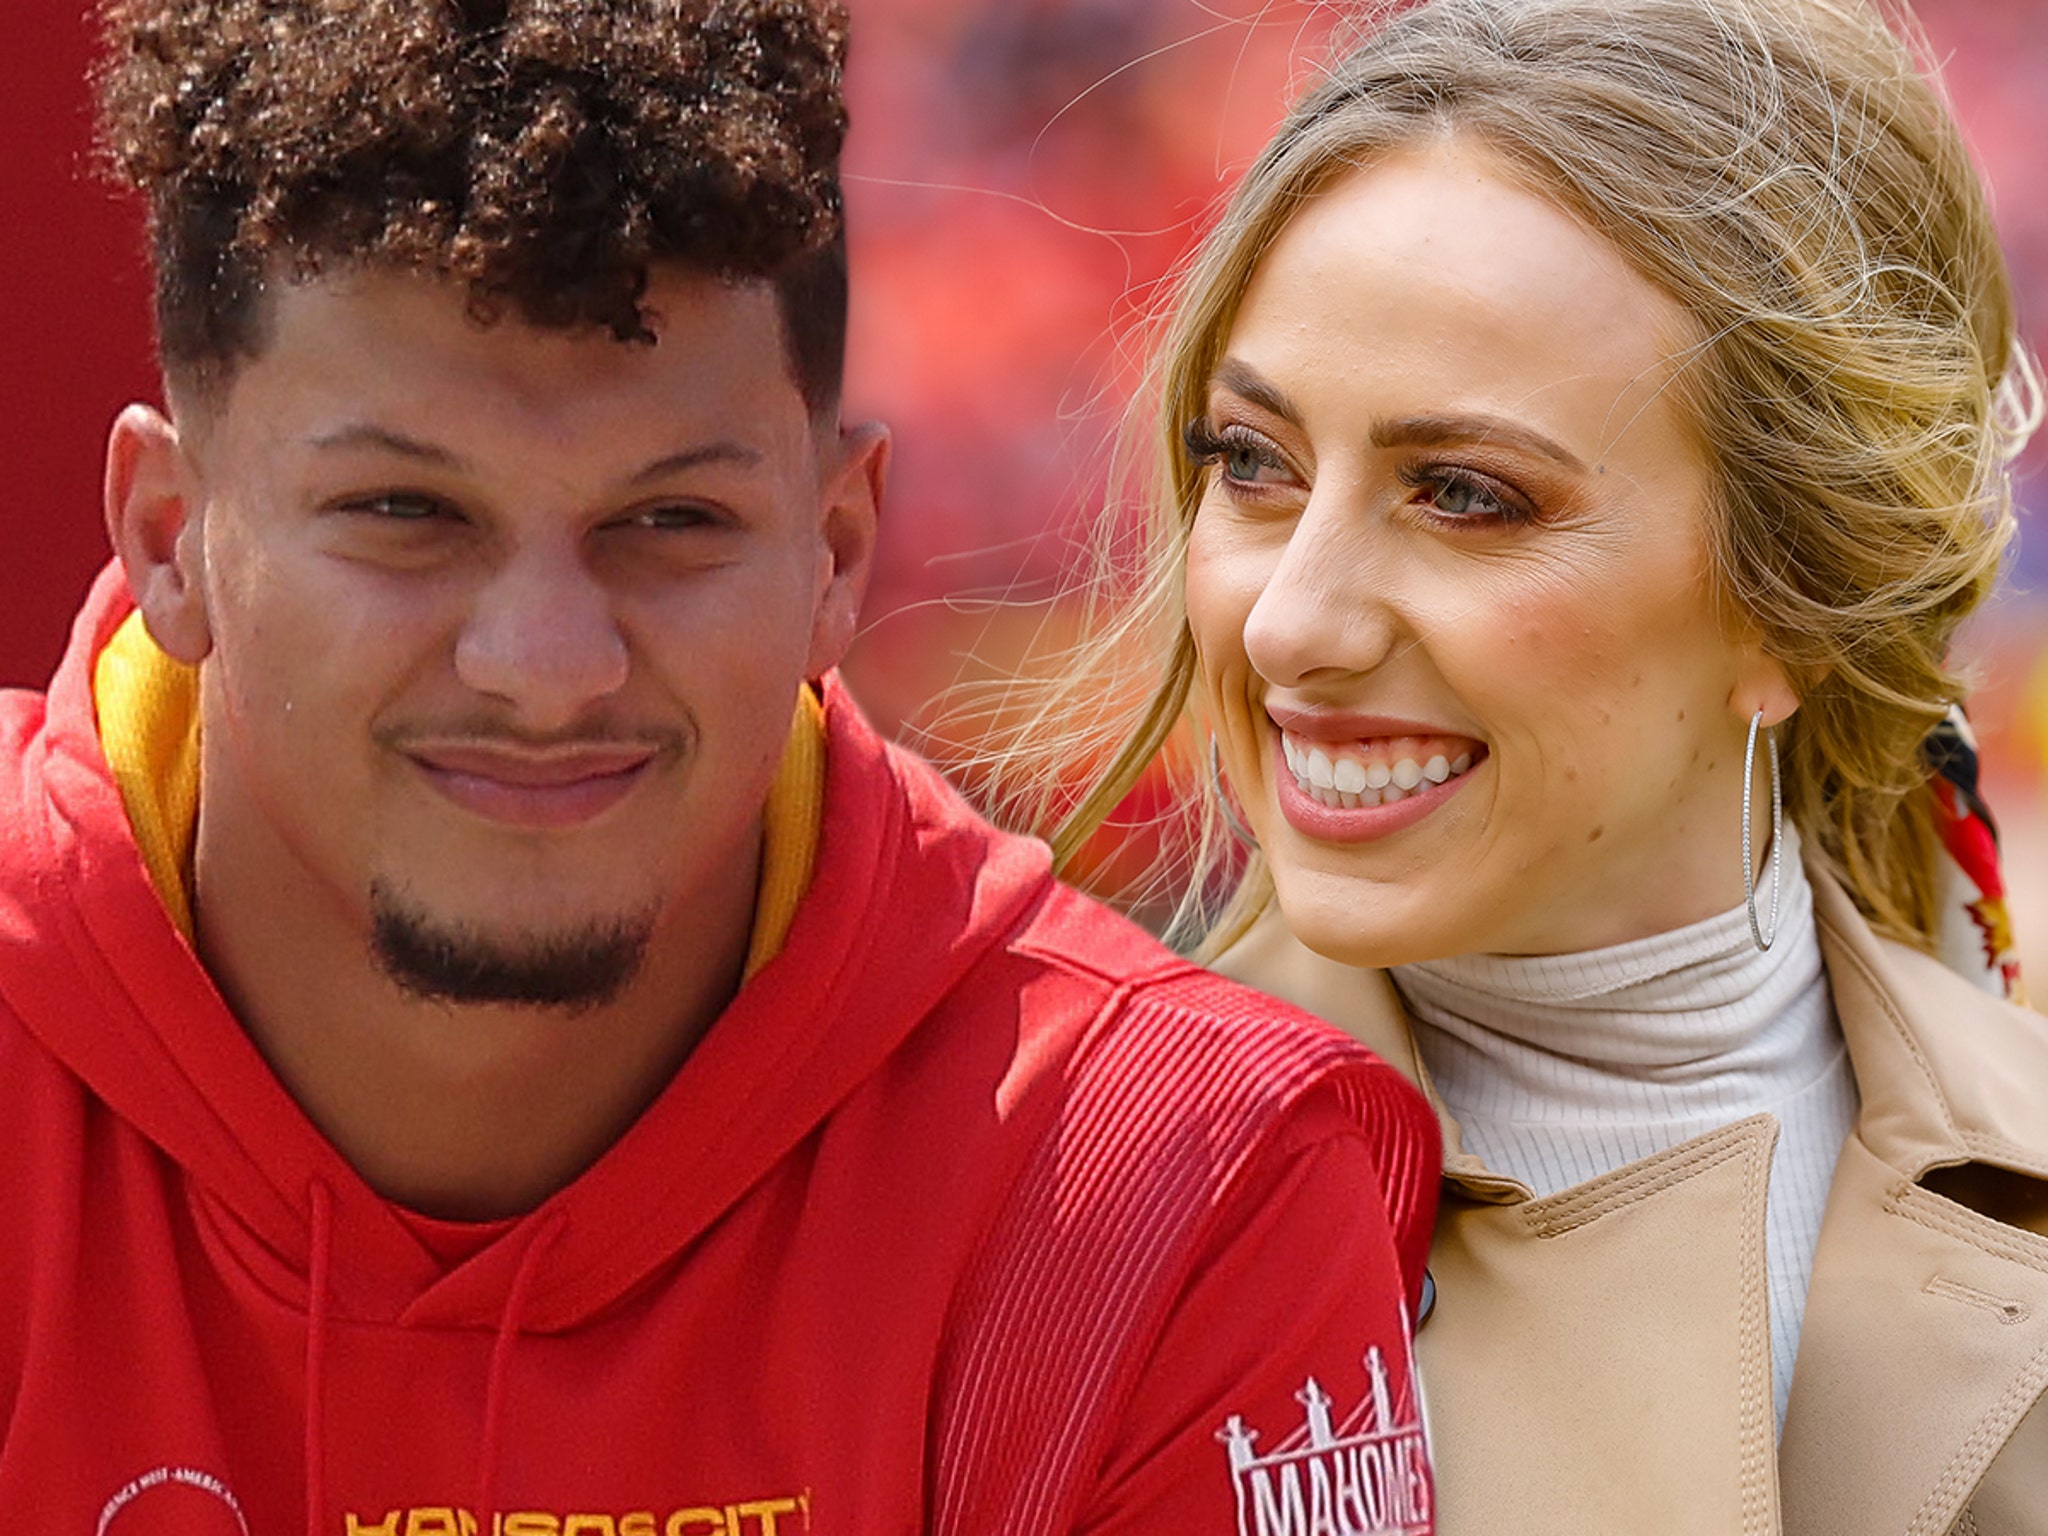 Patrick Mahomes and Brittany Matthews get married in lavish